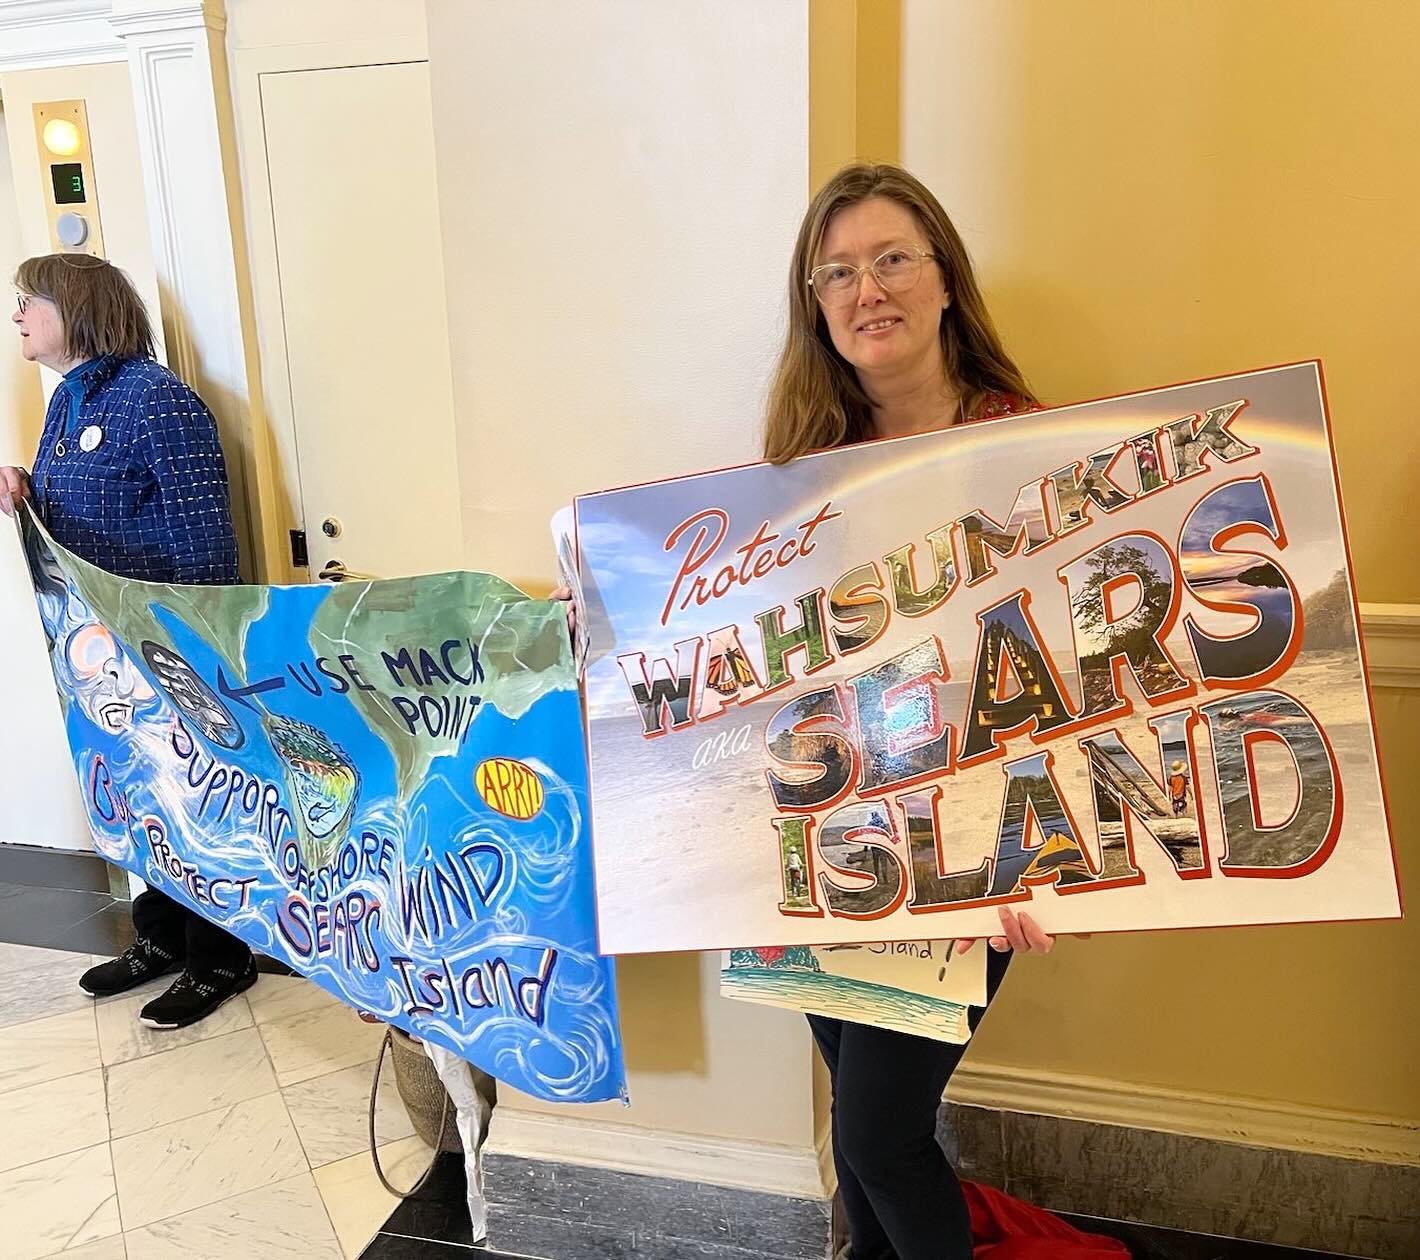 We did it! LD 2266 failed to pass in the House! We don&rsquo;t need to bulldoze paradise in order to have renewable energy. #searsisland #savesearsisland #wahsumkik #savewahsumkik #allianceforsearsisland #maineconservation #keepmainegreen #renewablee